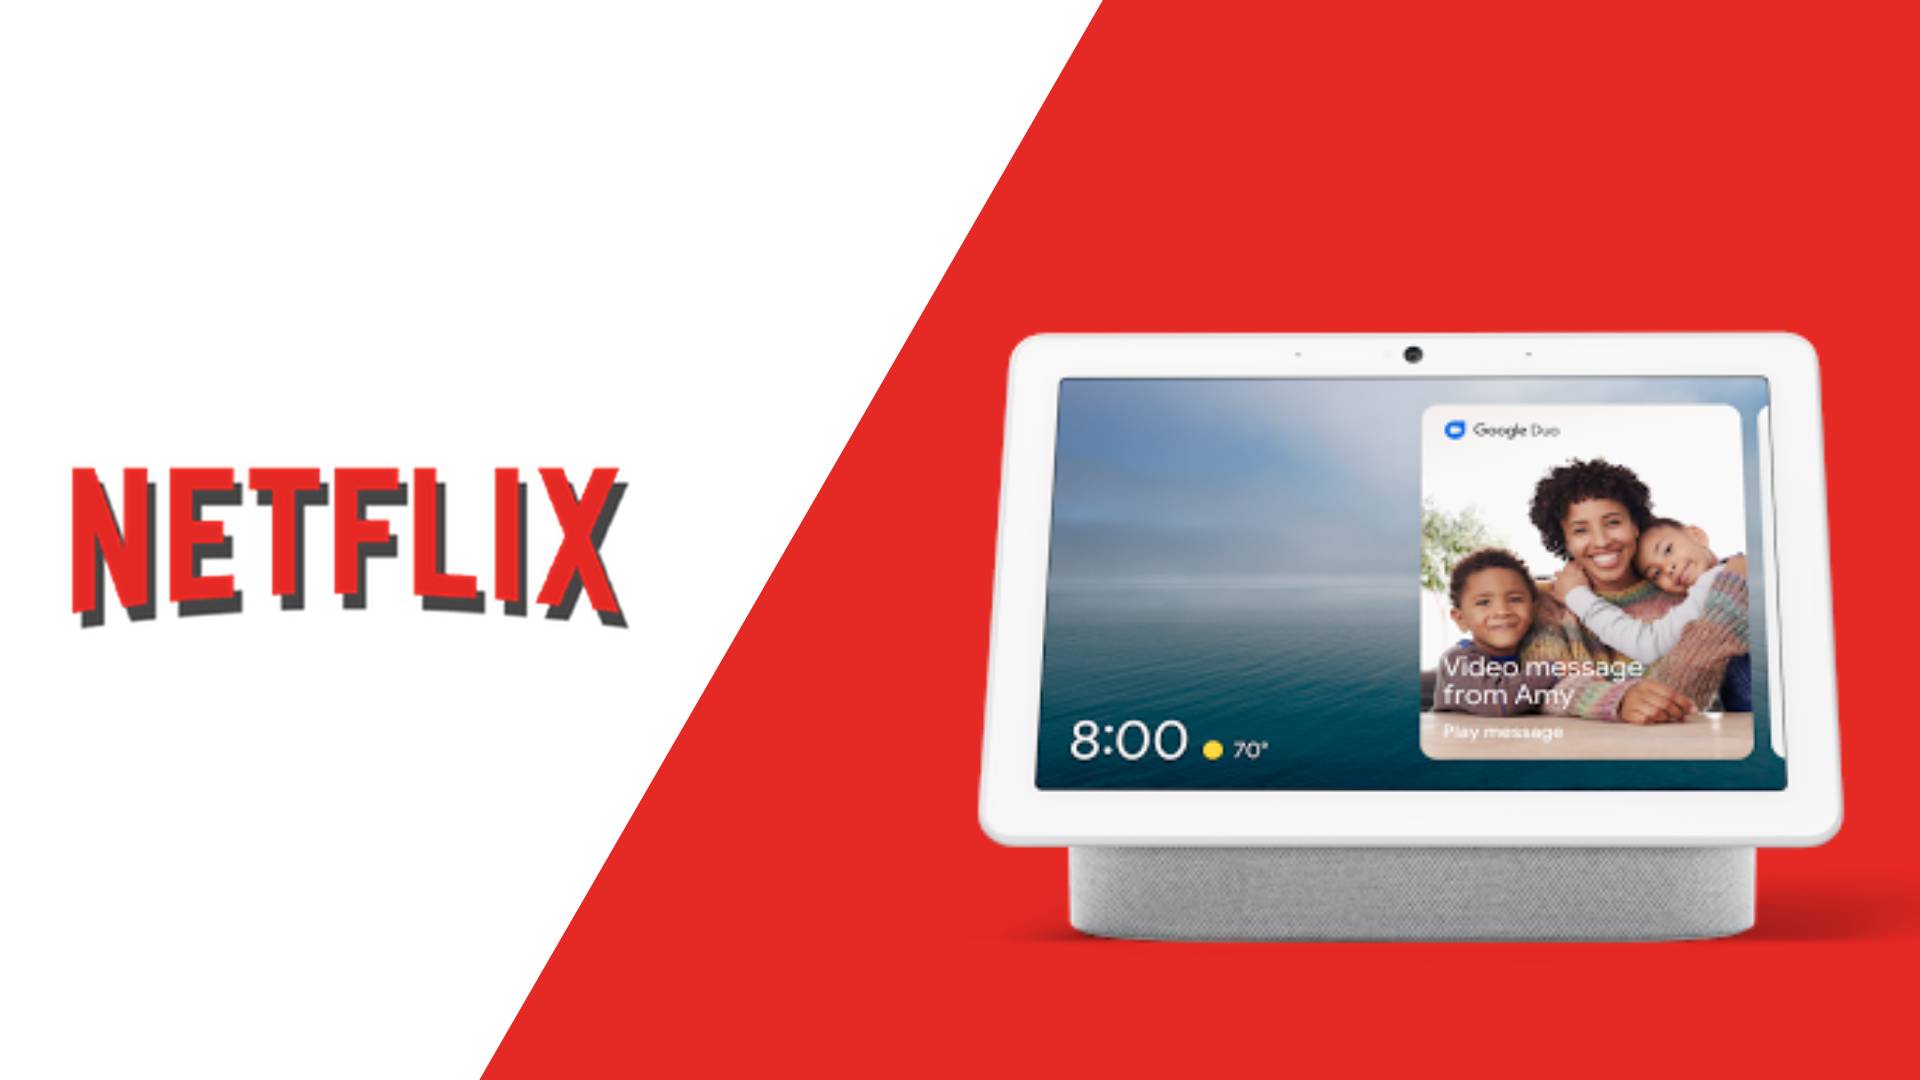 Netflix is now streaming on Google smart displays, NBCU’s Peacock streaming service hits 1.5M app downloads in first 6 days And Other Top News